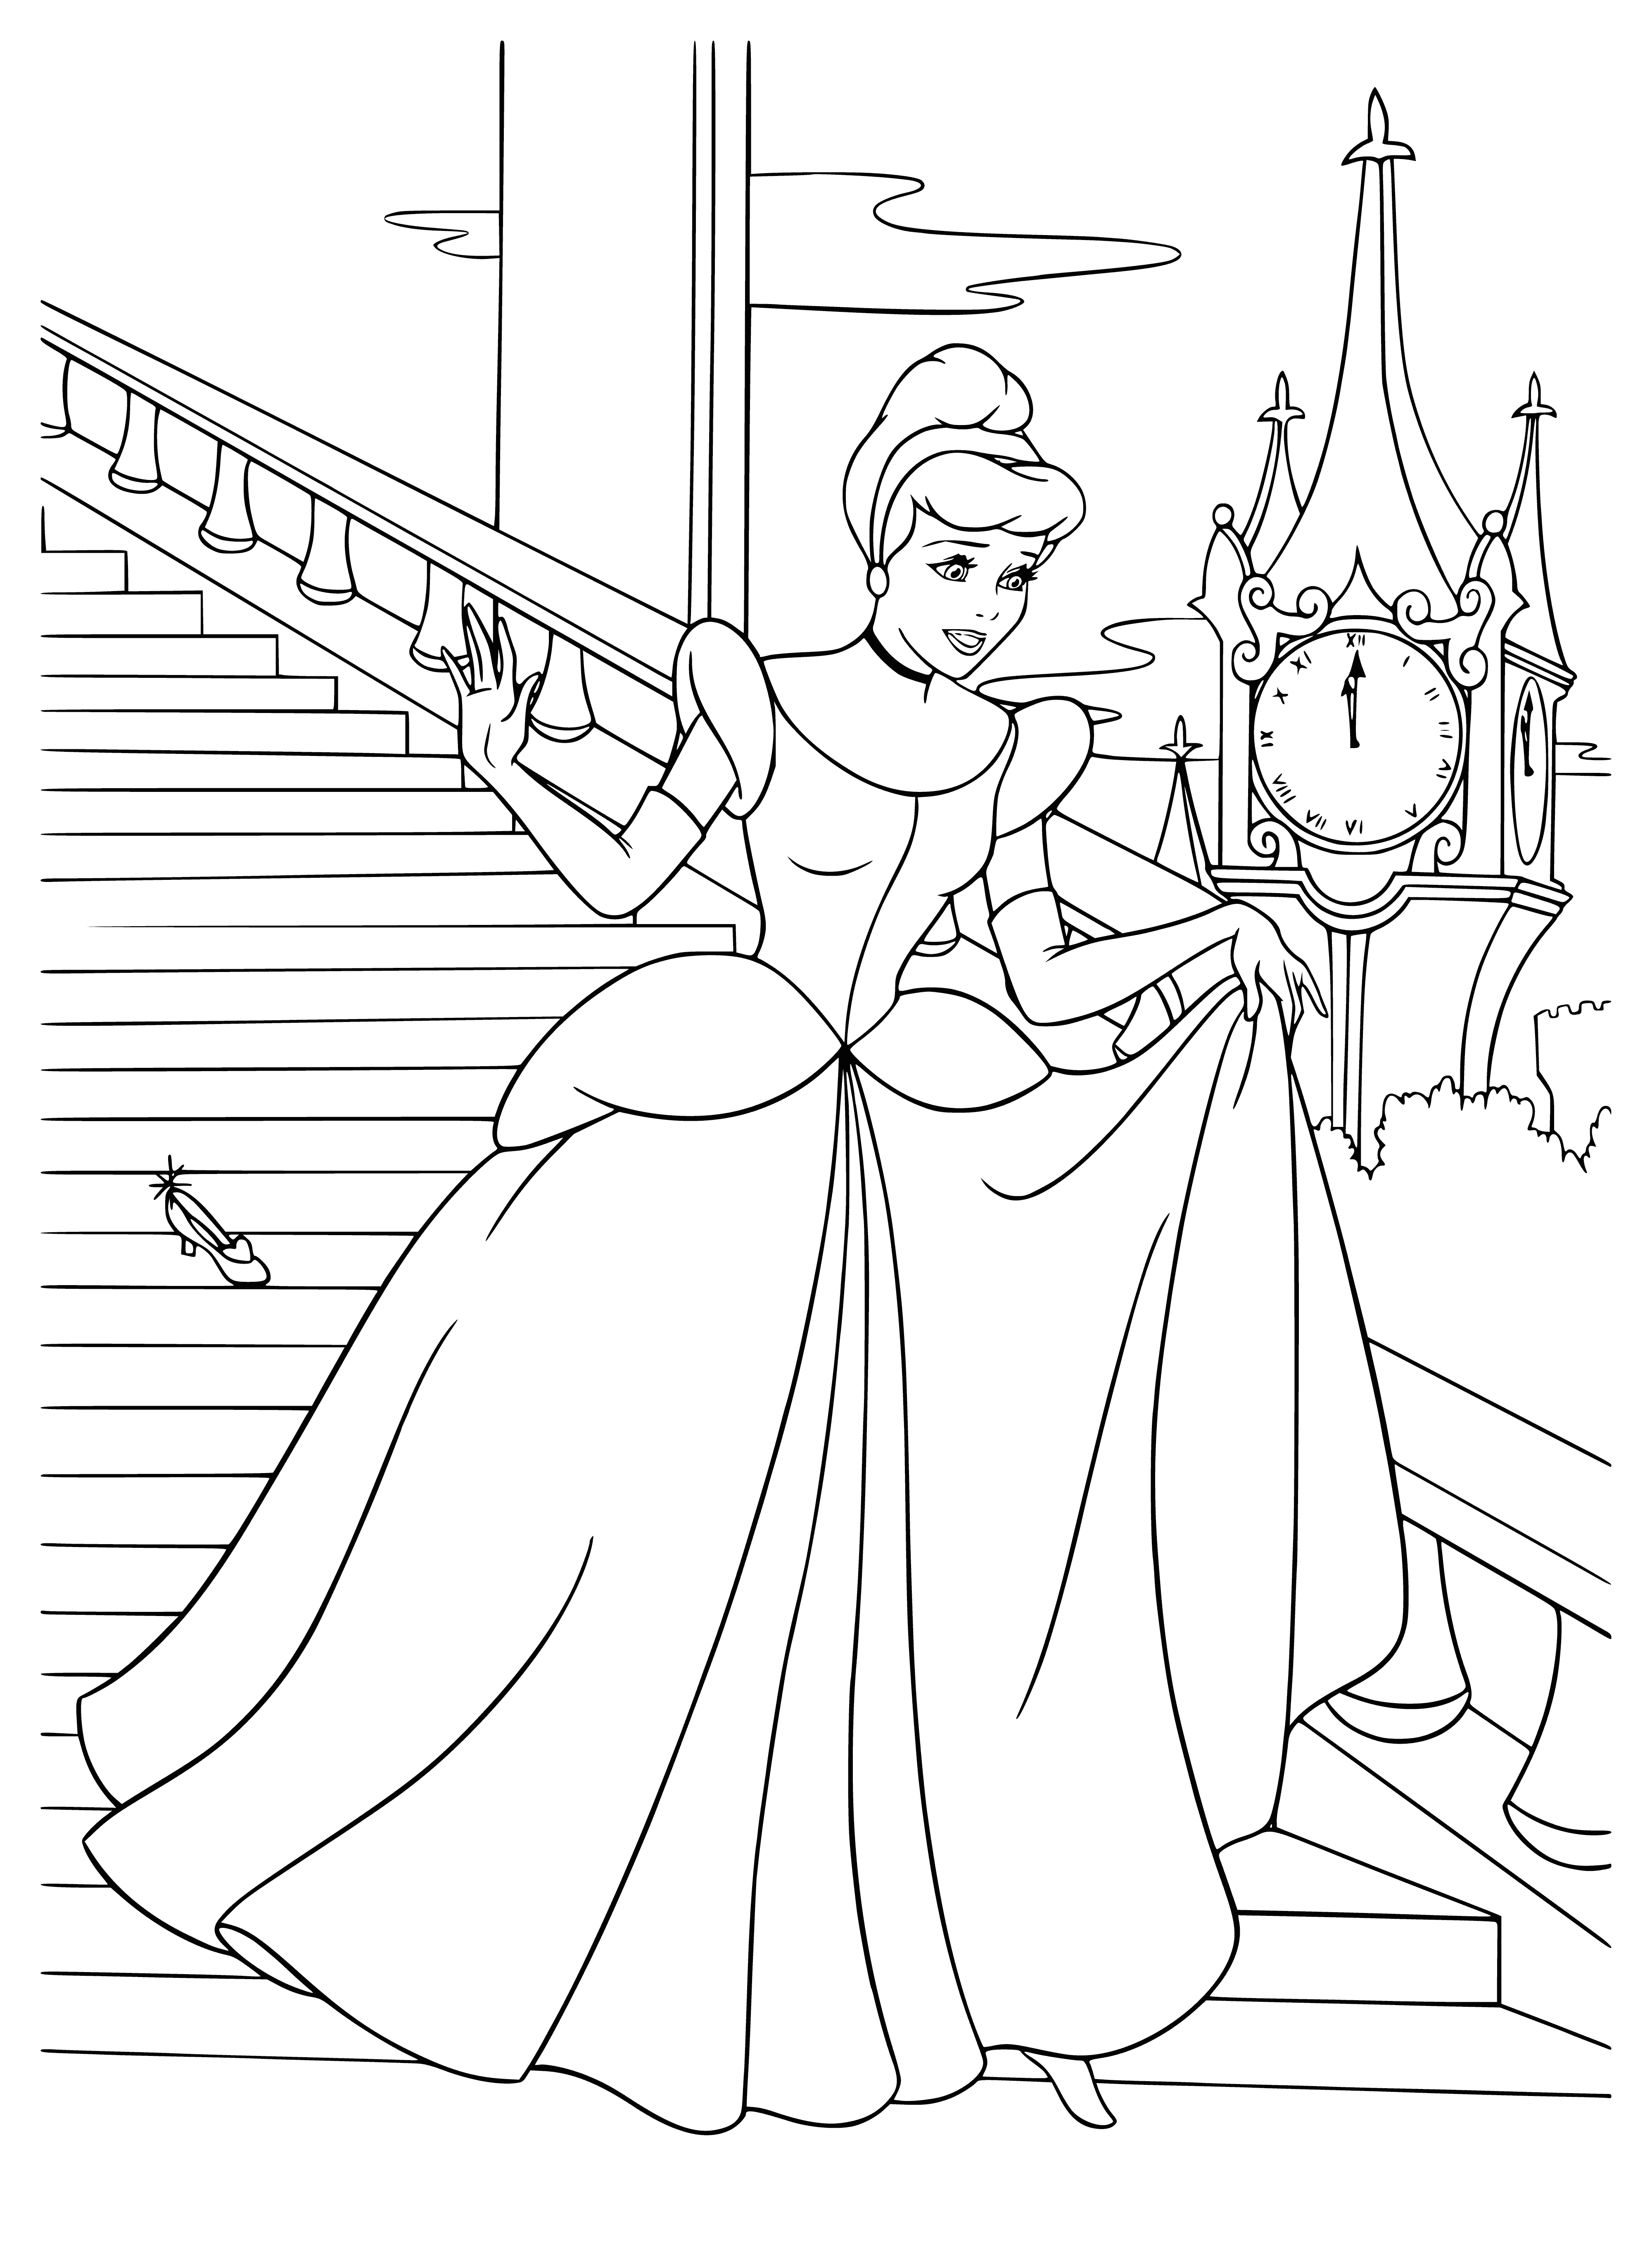 coloring page: Woman kneeling in devastation, missing a shoe, face to the ground.